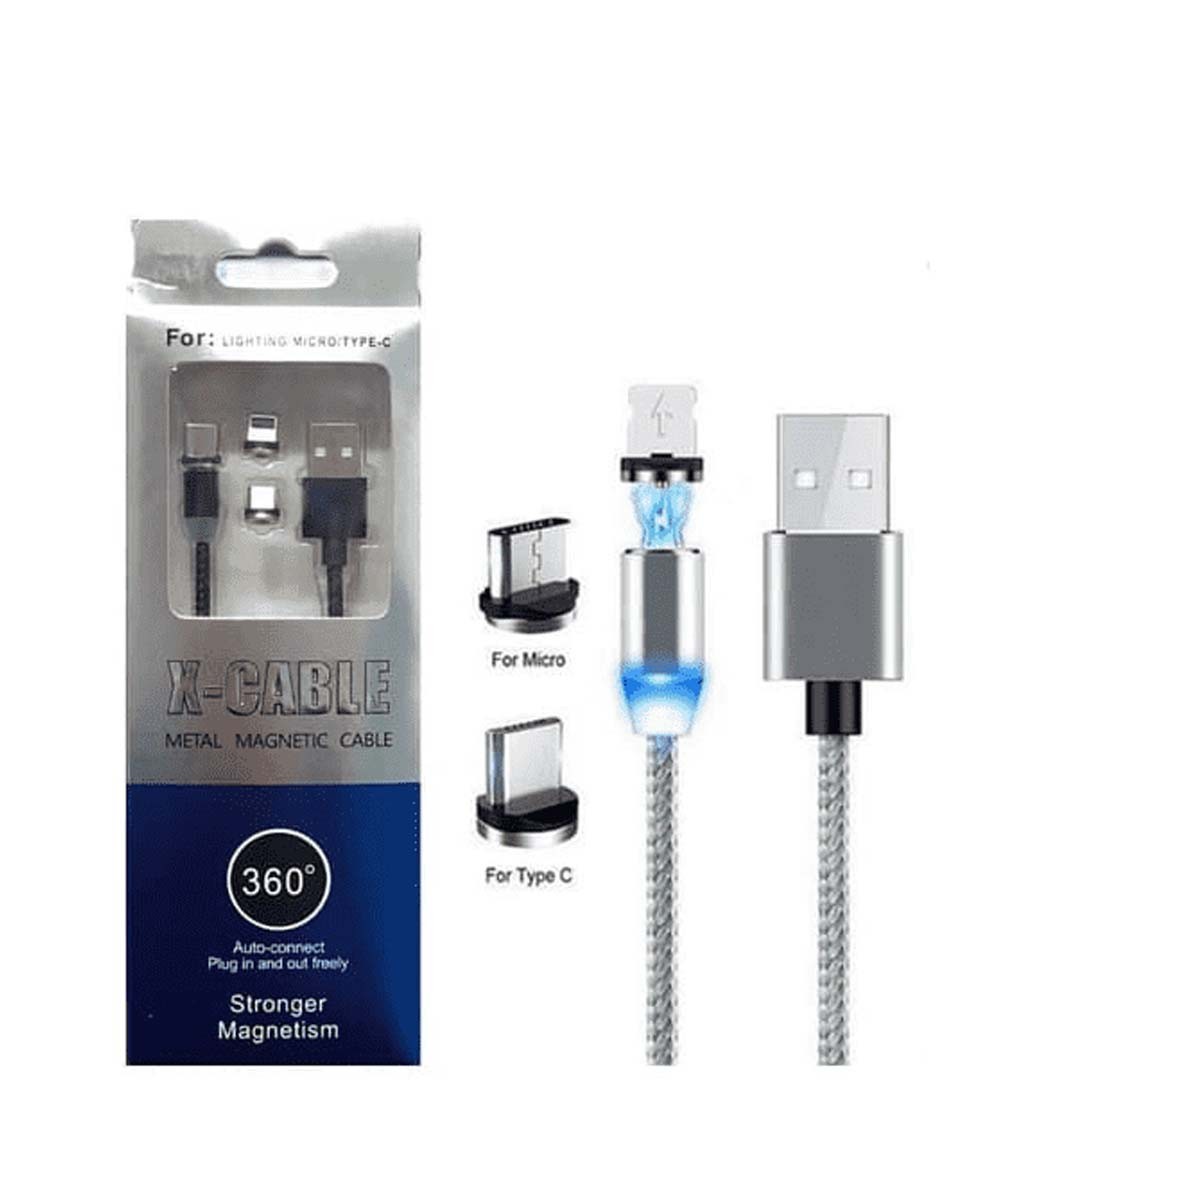 x-cable metal magnetic cable fast charging micro usb cable type-c magnet charger-iphone